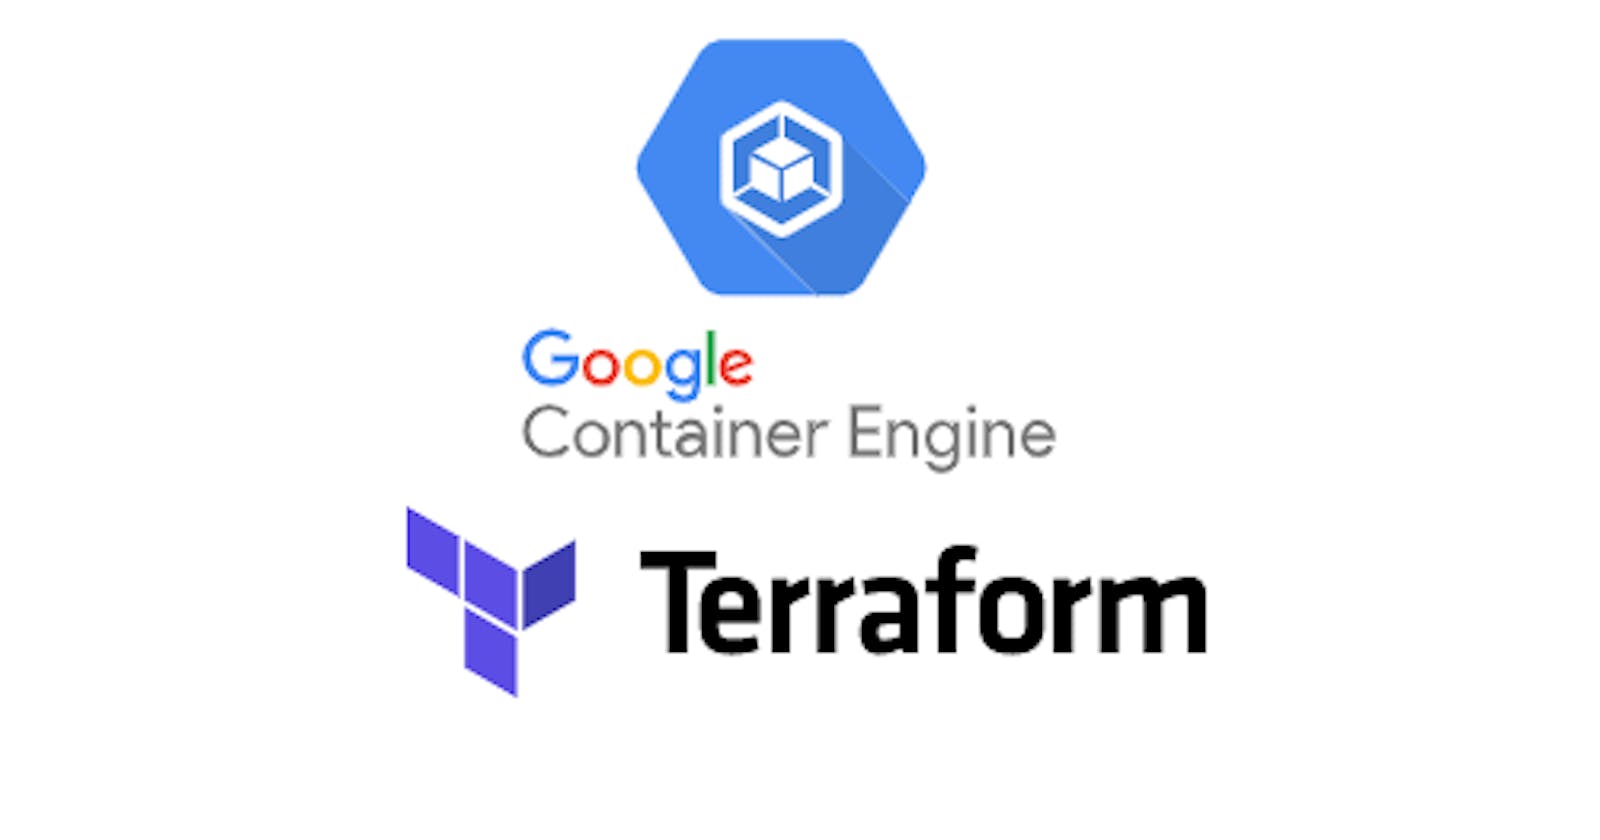 K8s Basics: Getting started with Terraform and GKE